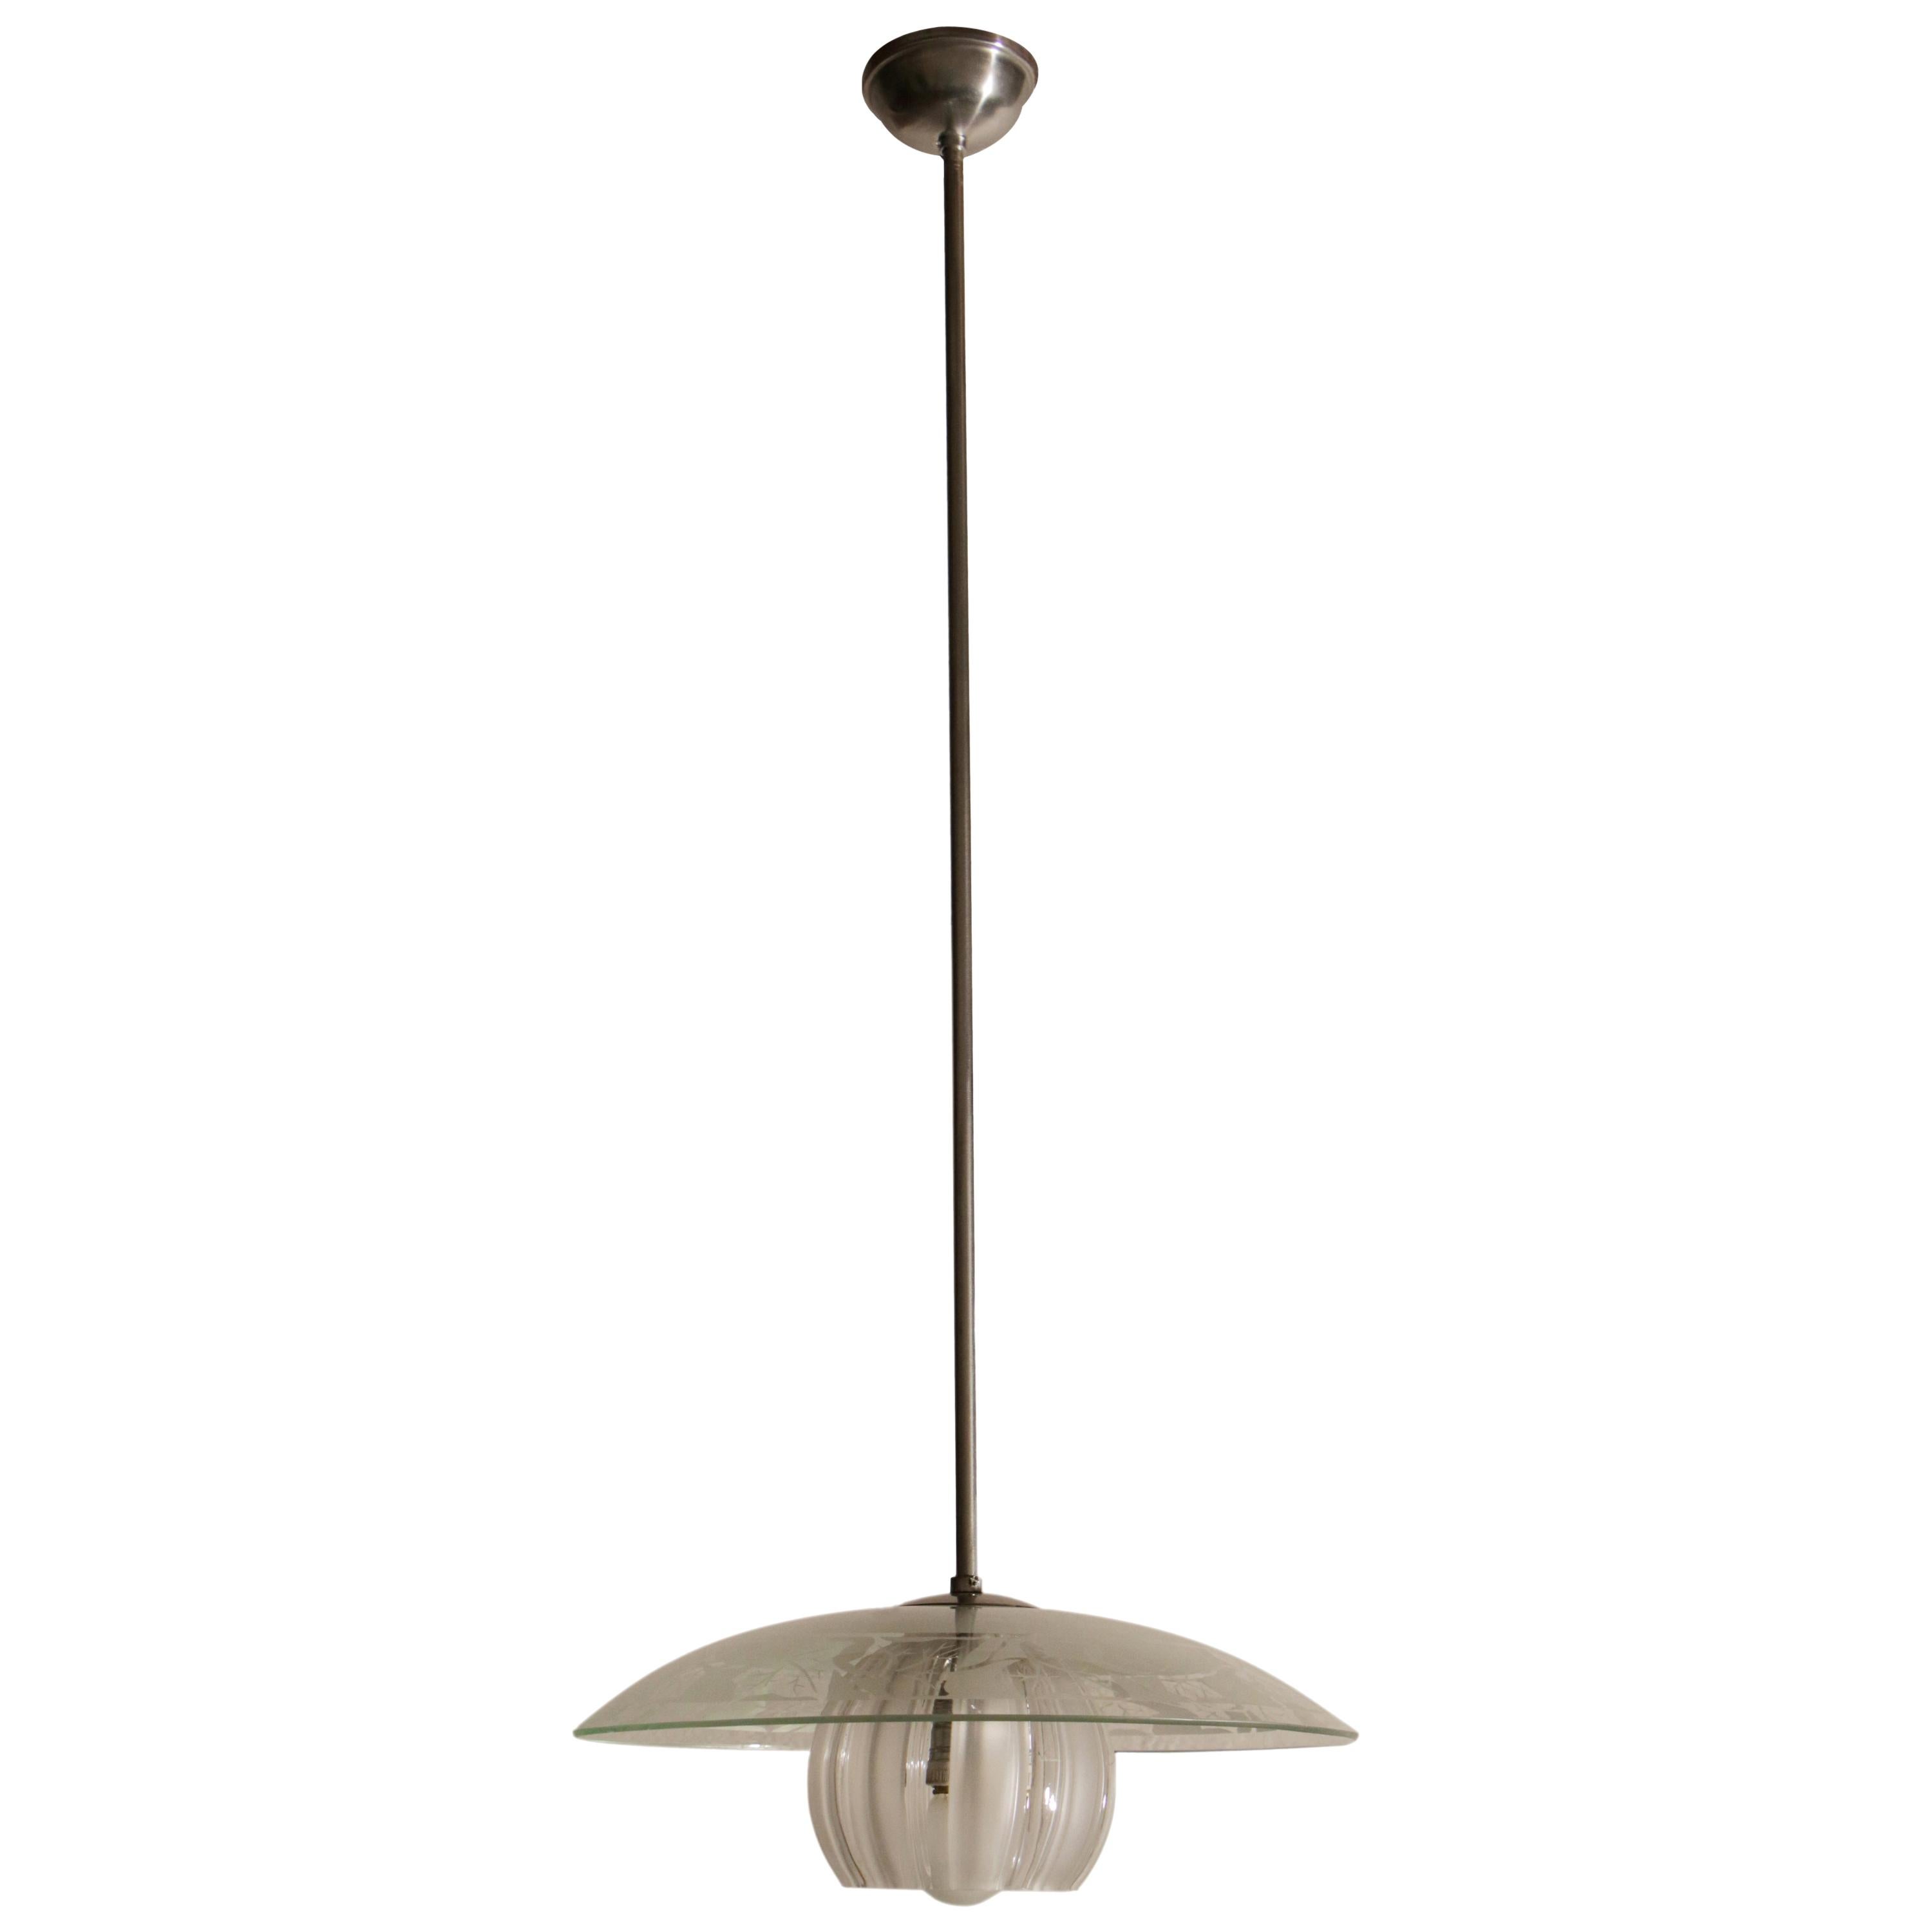 Italian Mid-Century Modern pendant lamp attributed to Stilnovo fashion house, from 1950. This pendant lamp is made from blown and serigraph glass with a shiny aluminium structure. The restoration was made with great care by a specialized craftsman